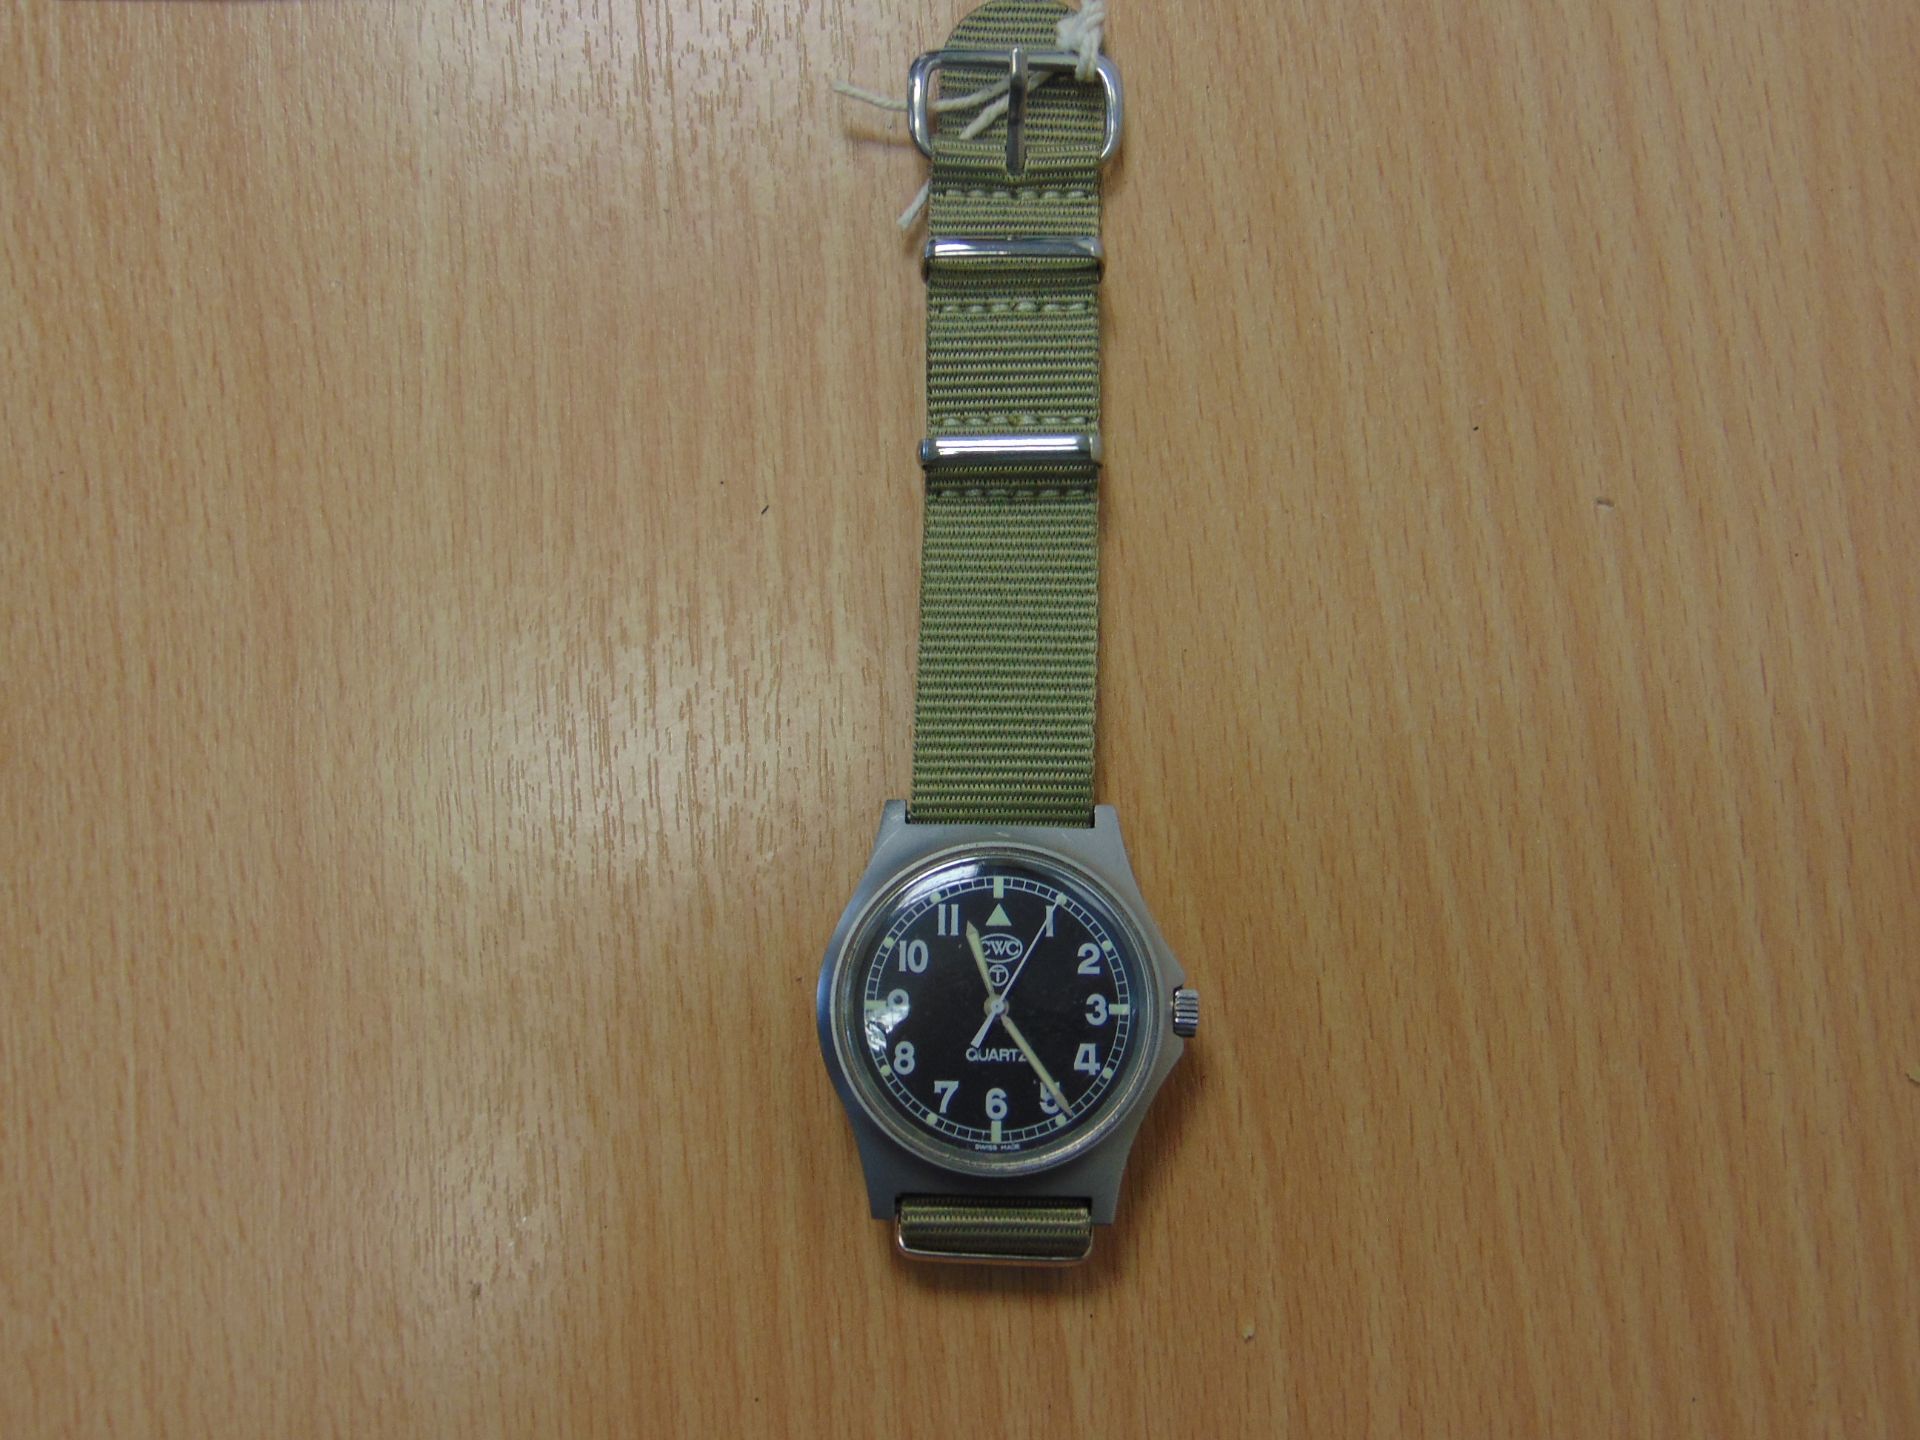 CWC "RARE" 0552 ROYAL MARINES/ ROYAL NAVY ISSUE SERVICE WATCH DATED 19889 GULF WAR - Image 2 of 8